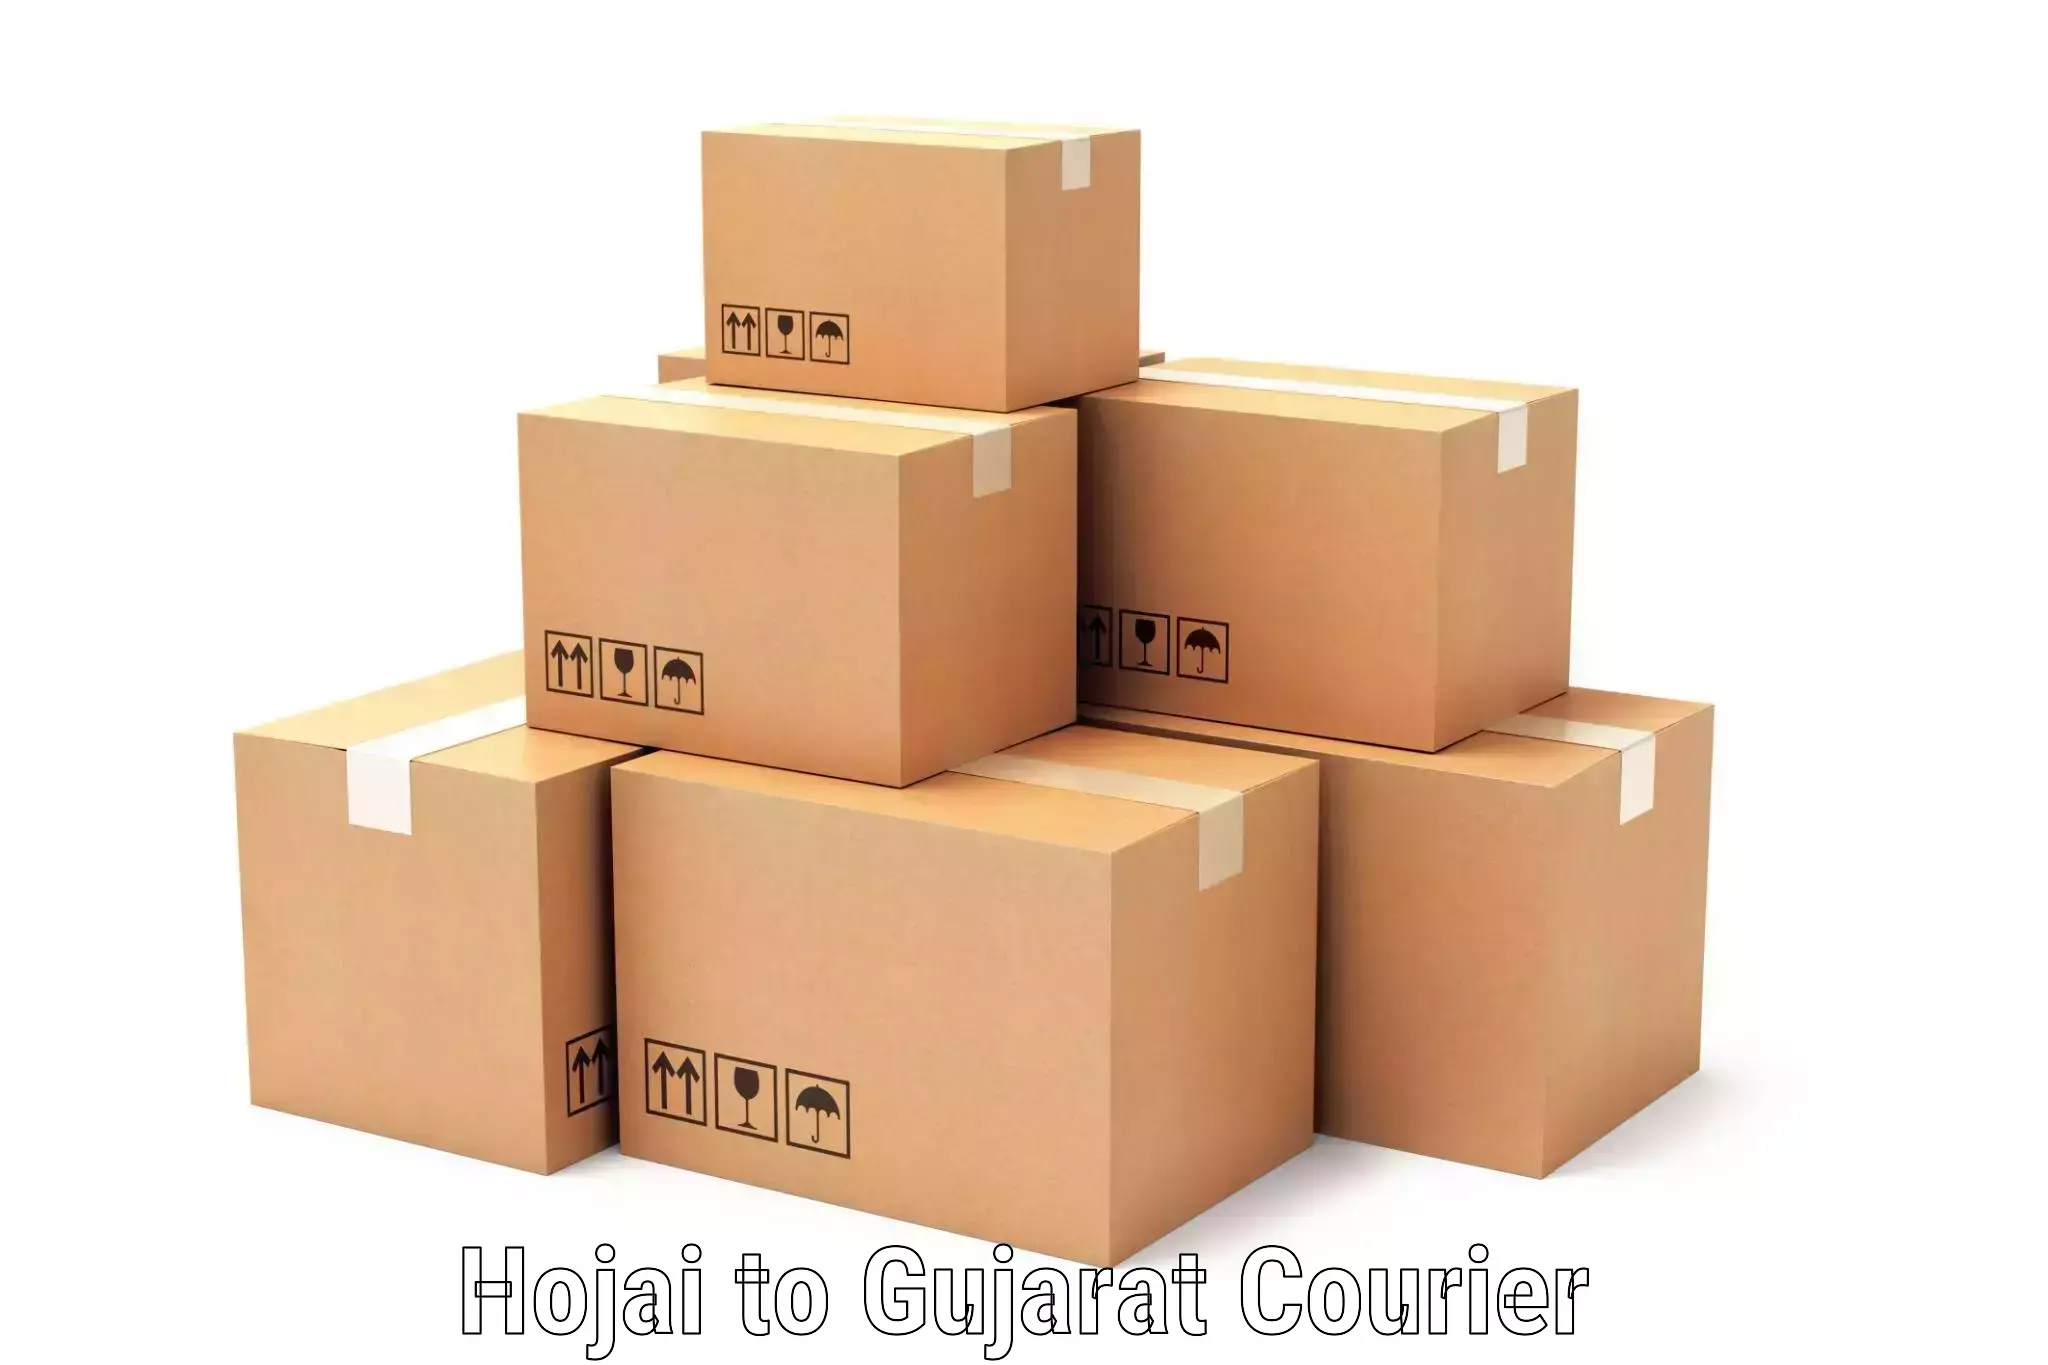 Customer-oriented courier services Hojai to Gujarat